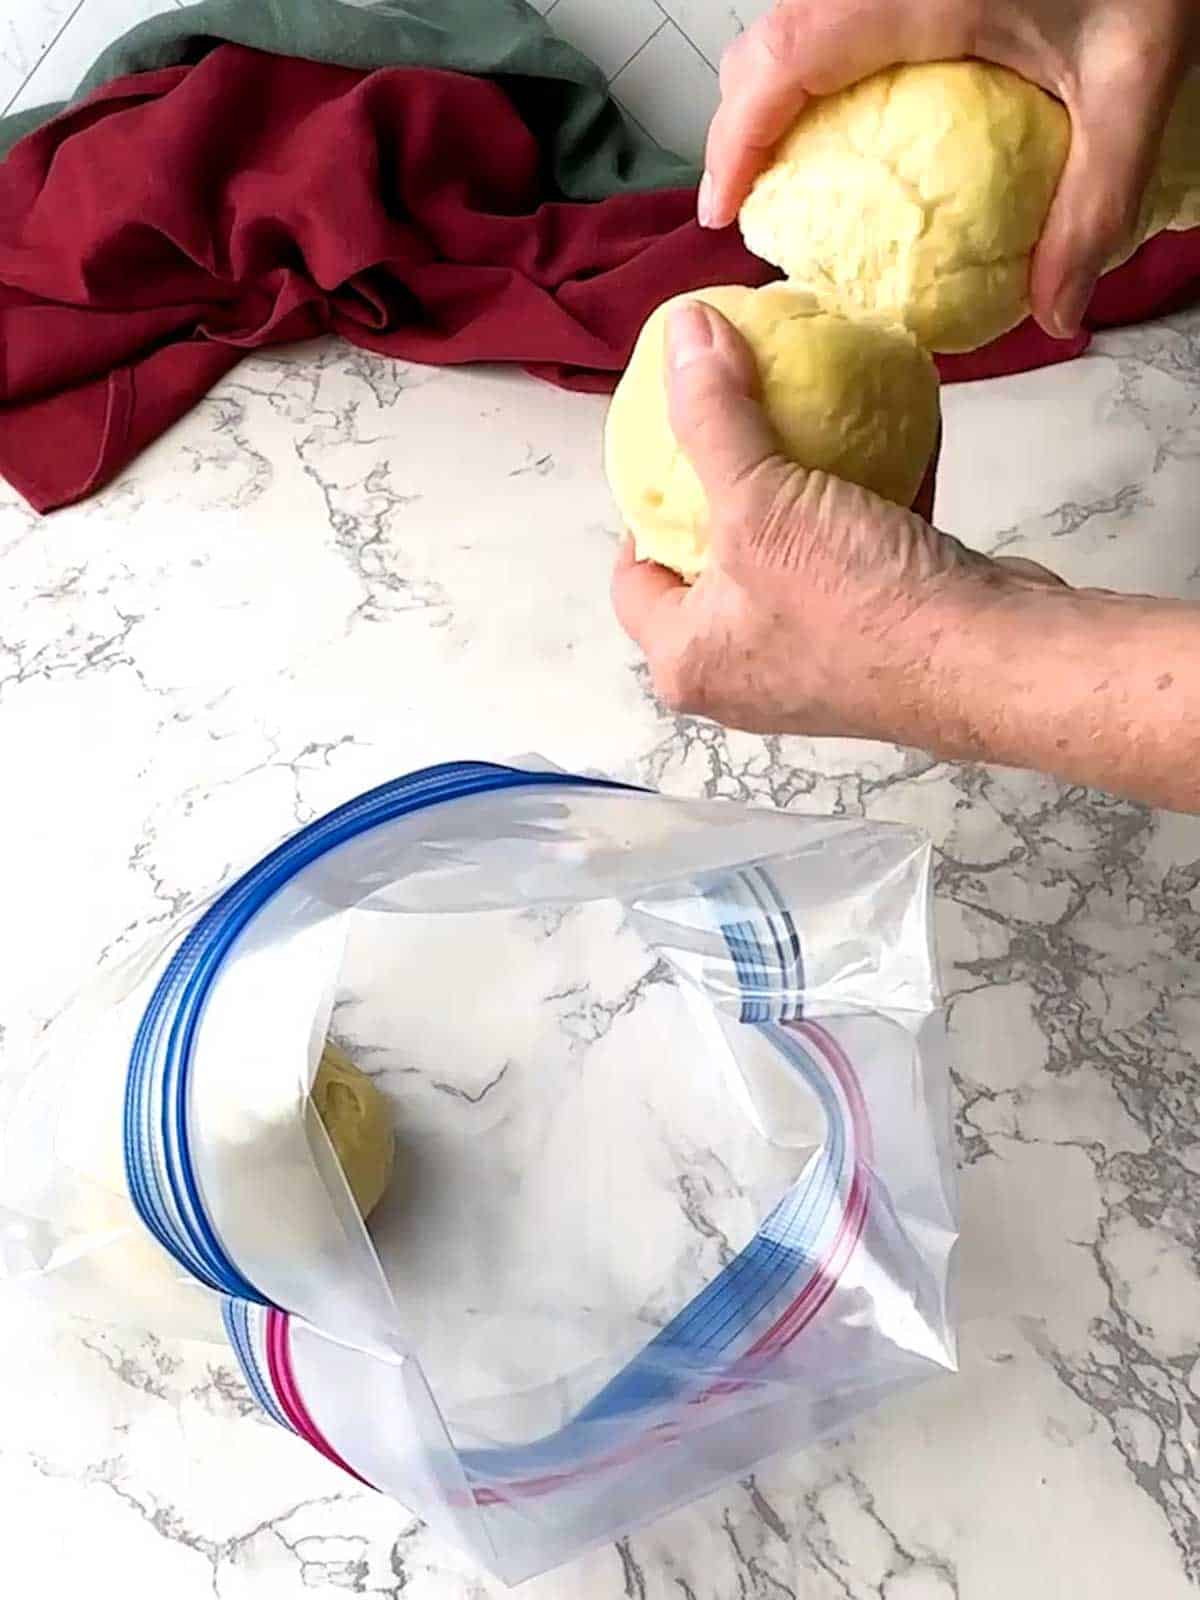 Placing parbaked rolls into a Ziploc bag.